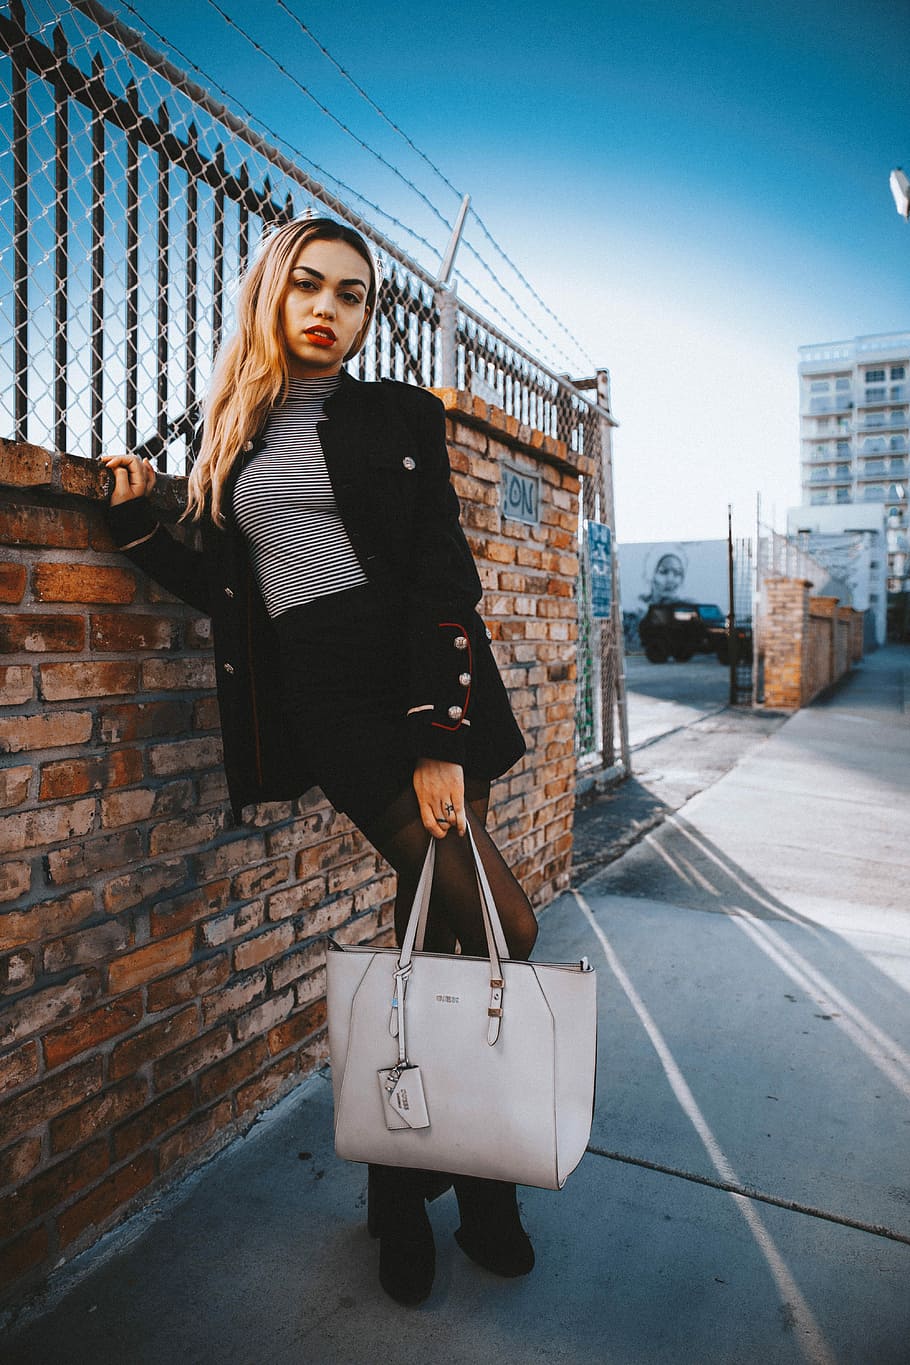 woman wearing black coat standing while holding tote bag besides concrete fence during daytime, woman carrying tote bag while leaning on brick wall